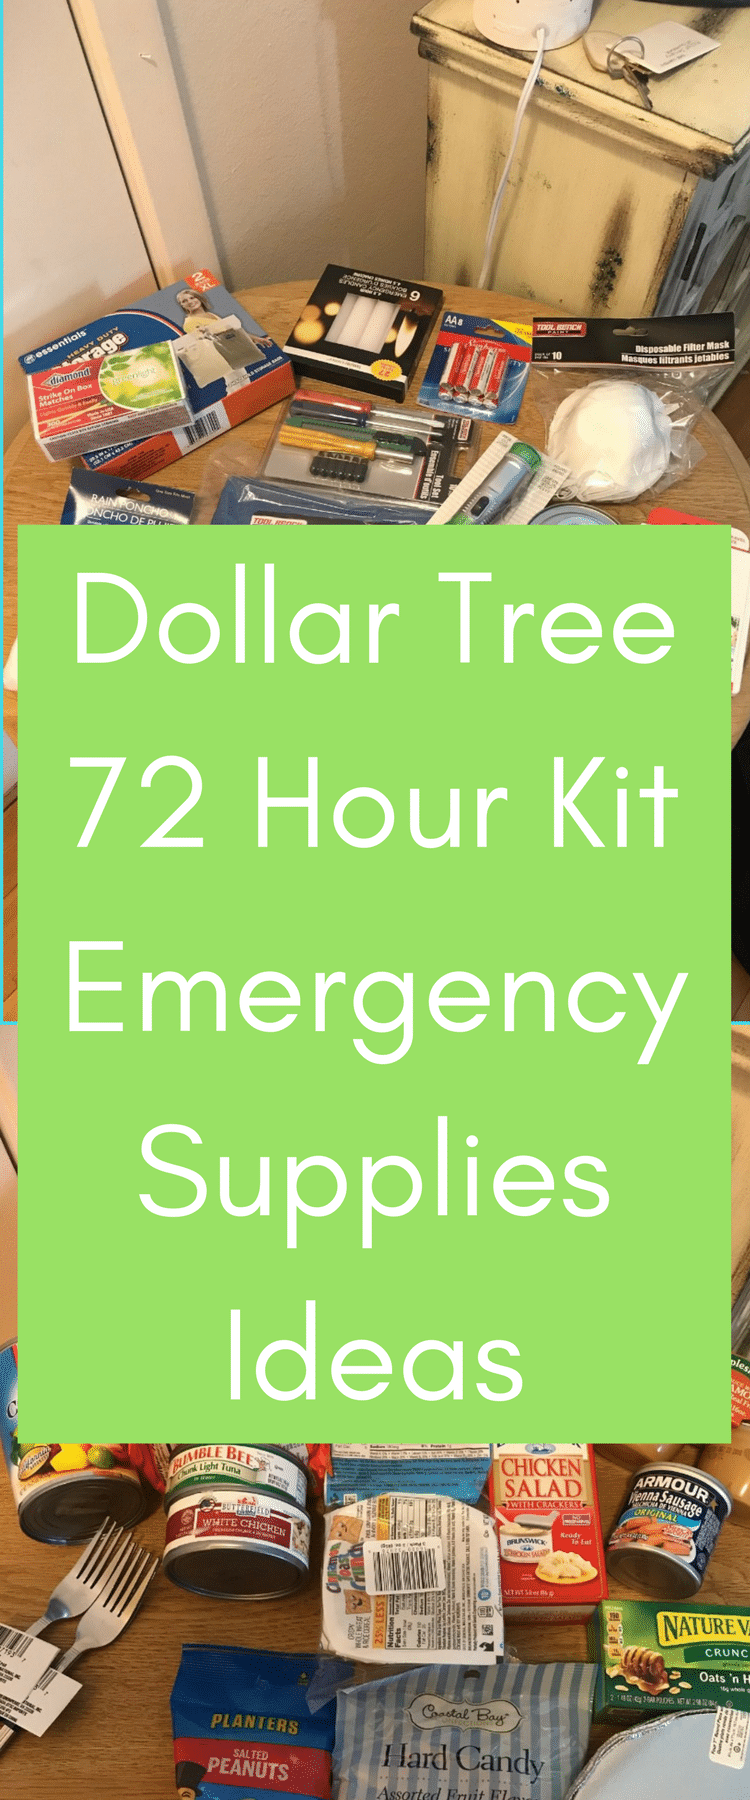 $20 Dollar Tree Survival Kit - 7 Day Survival Challenge - The Build 